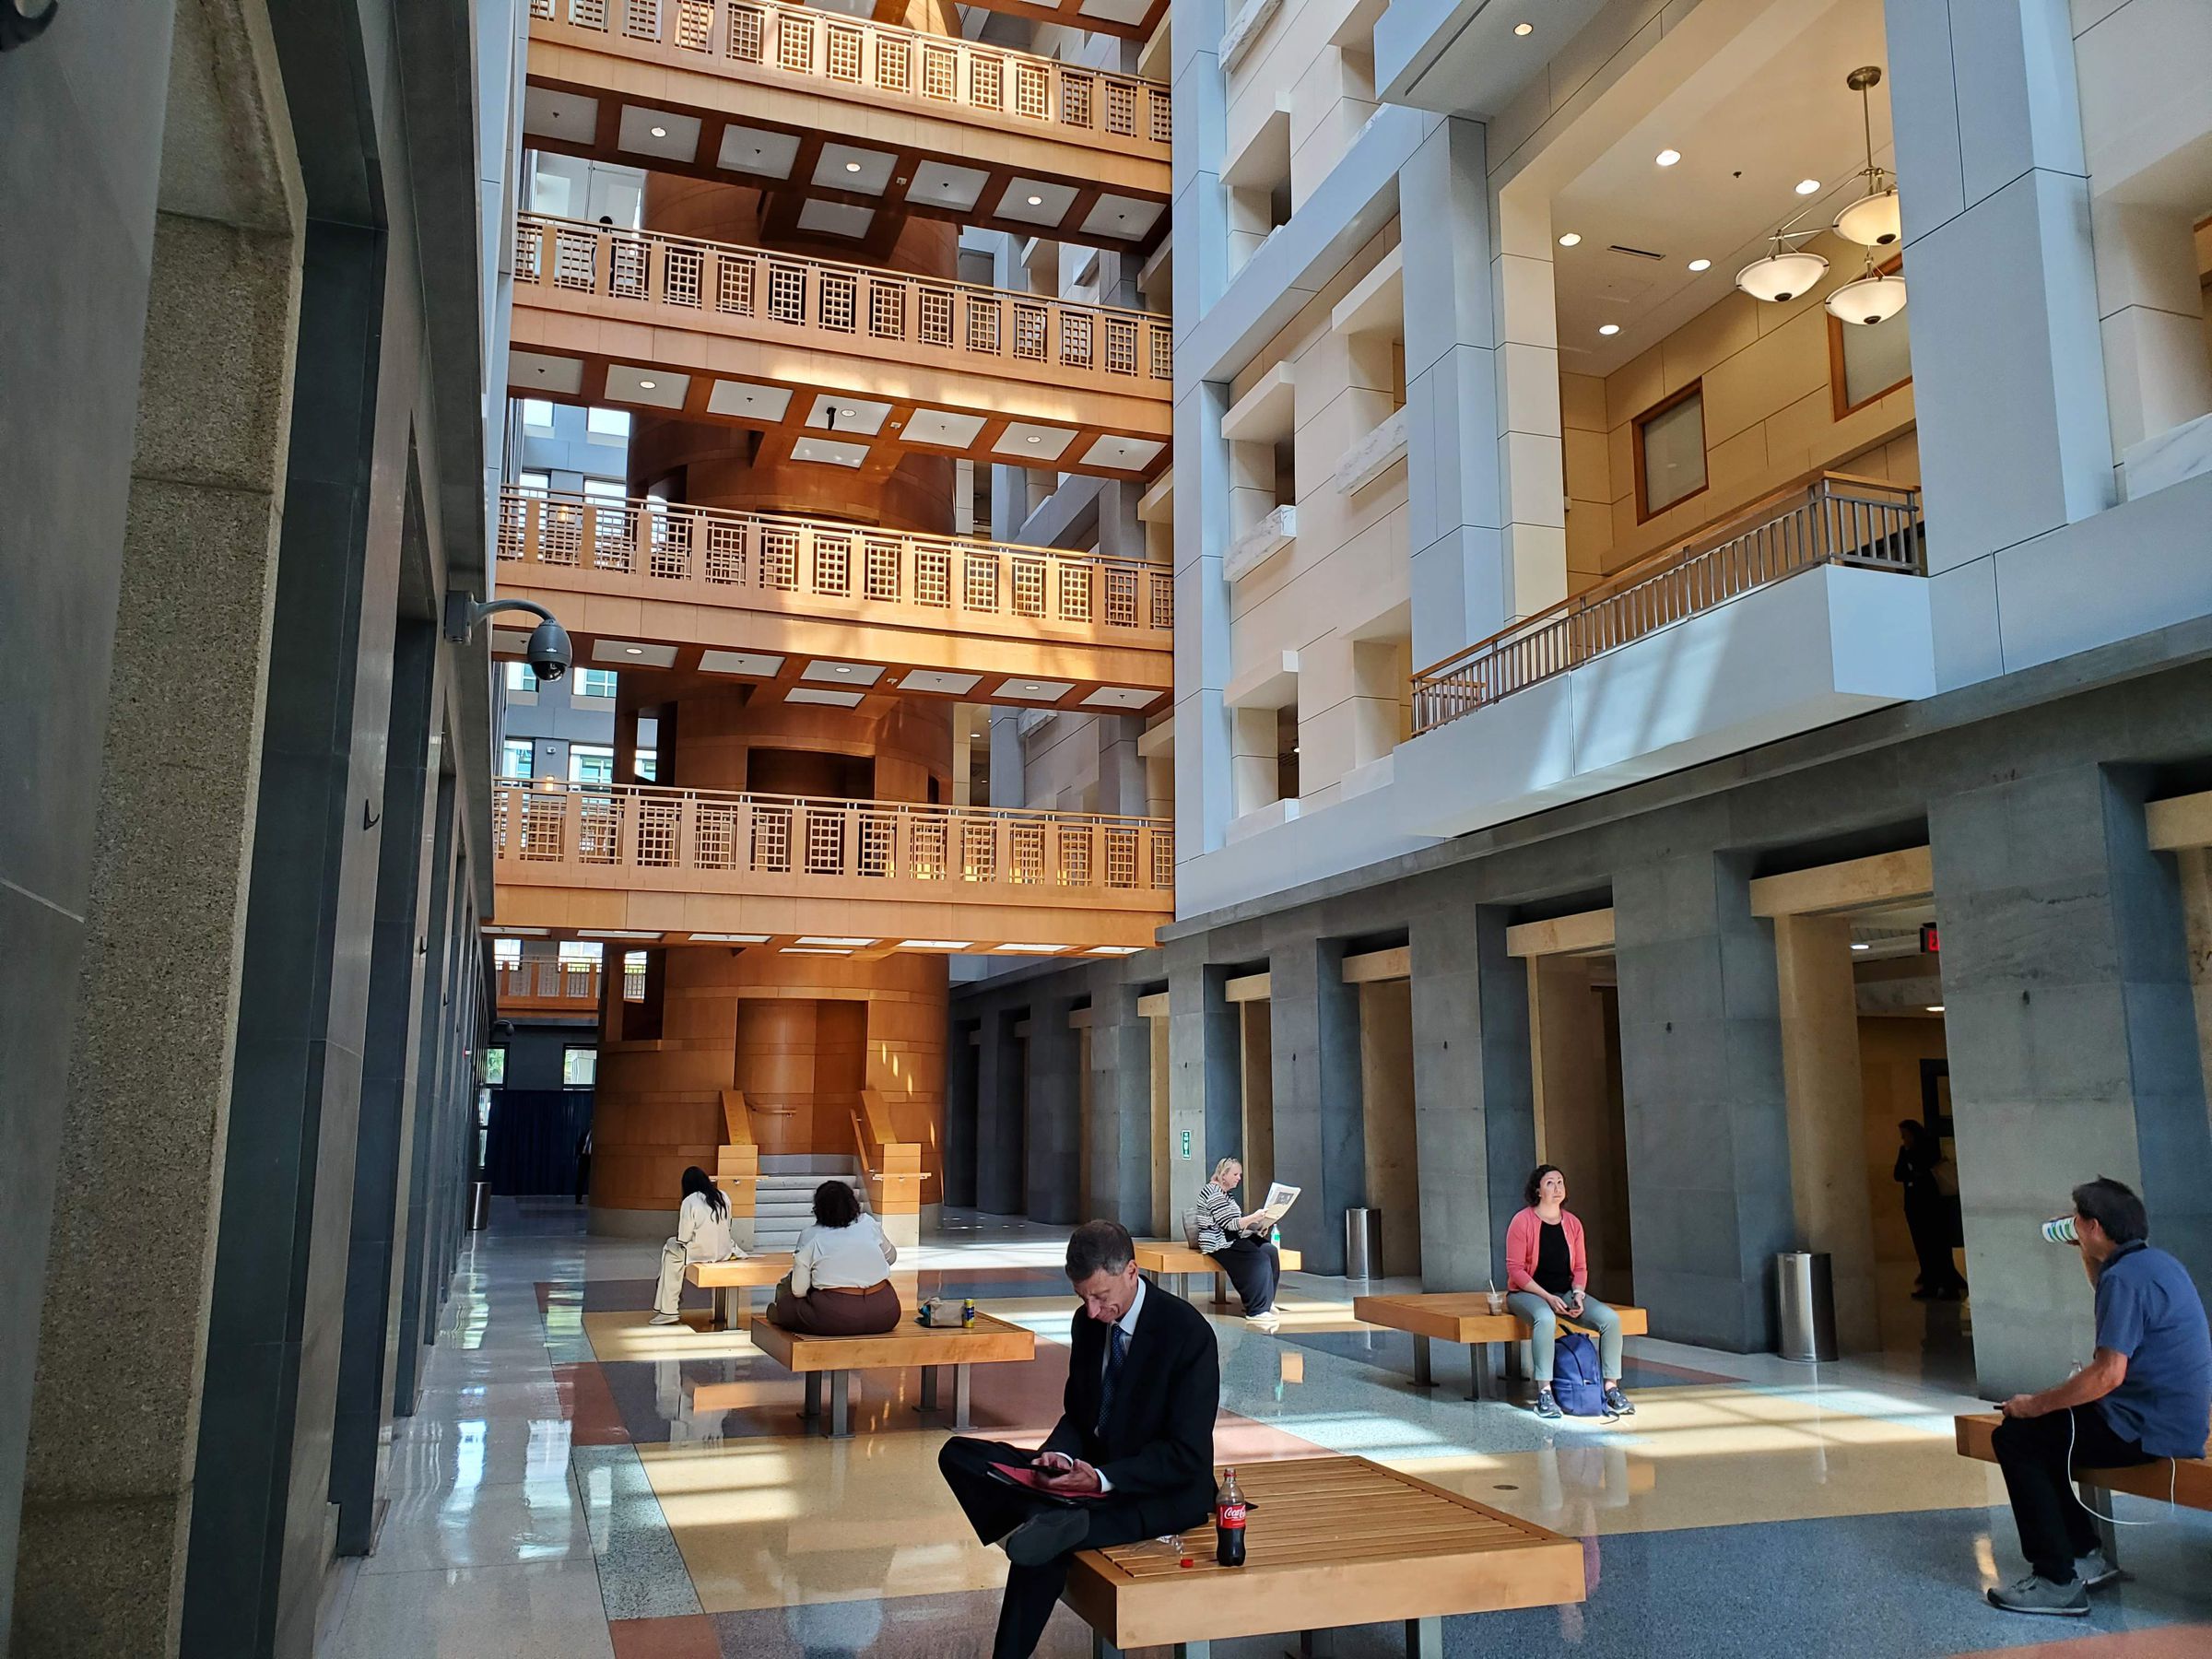 The atrium of the DC federal courthouse, with four floors of wooden balconies and people sitting on benches.